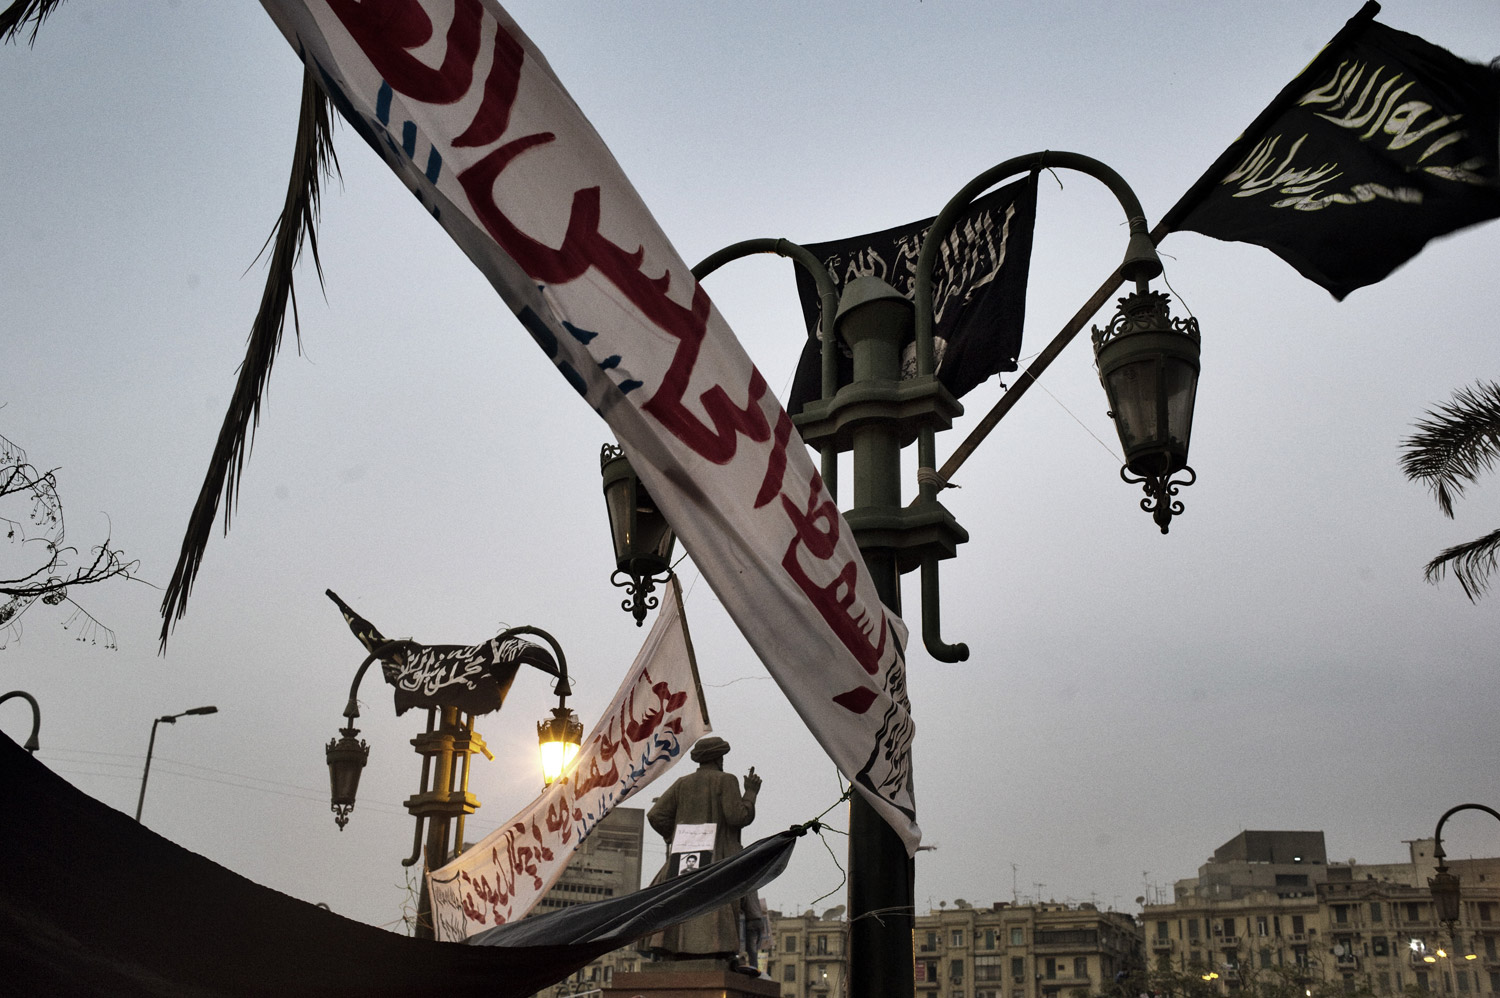 As clashes with police eased, the crowd in Tahrir Square grew larger each day. Banners and flags blanket the square, November 25, 2011.